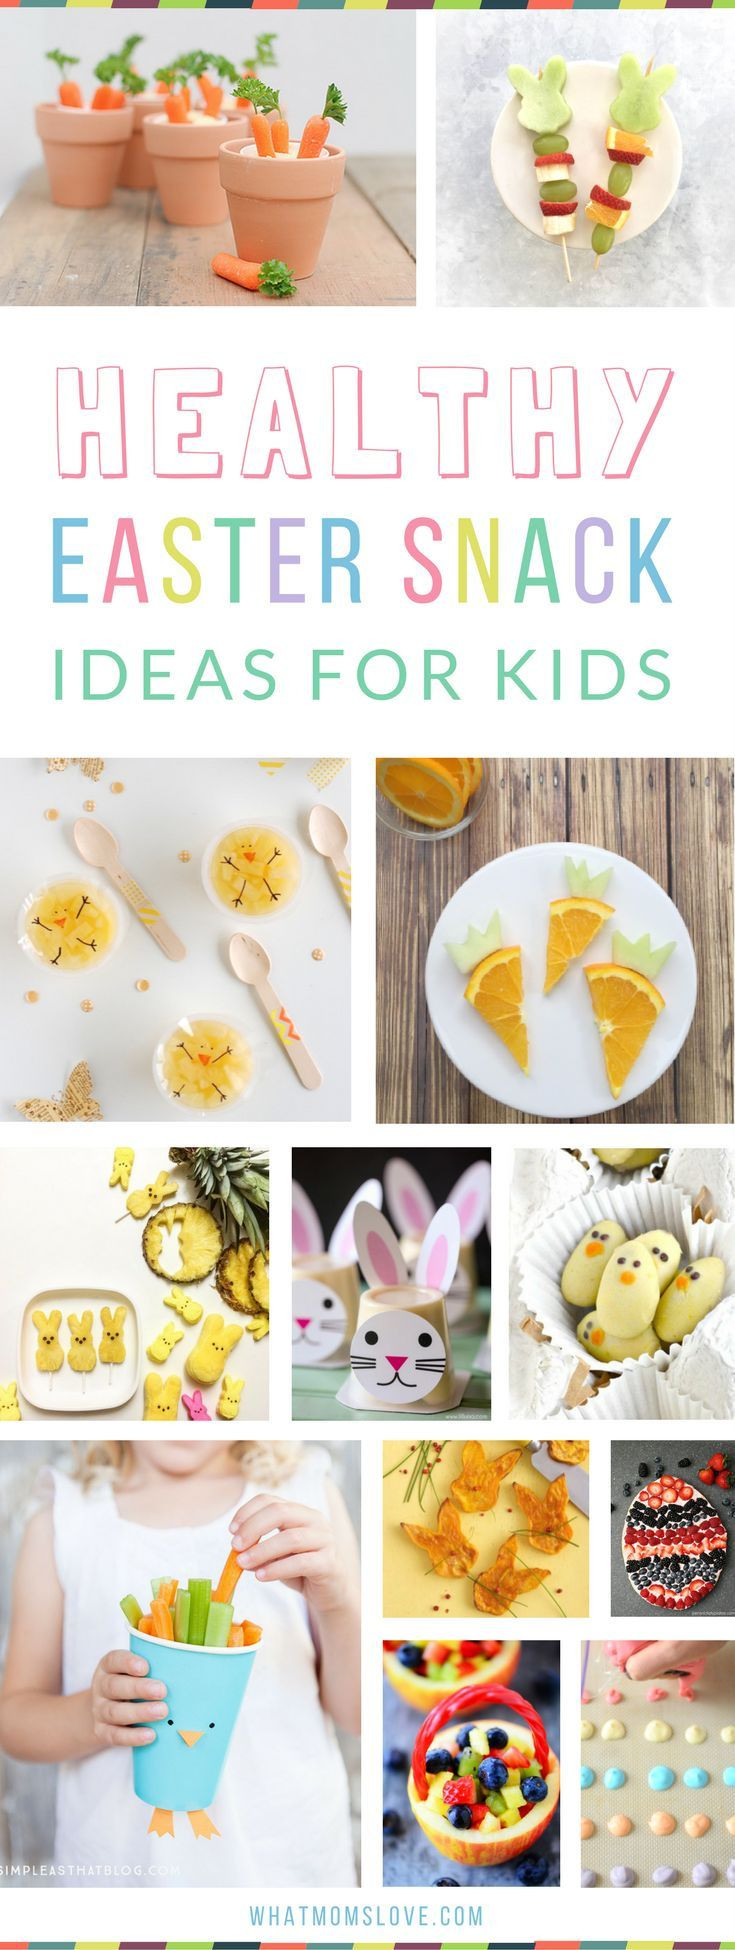 Kids Easter Party Snack Ideas
 425 best images about EASTER on Pinterest